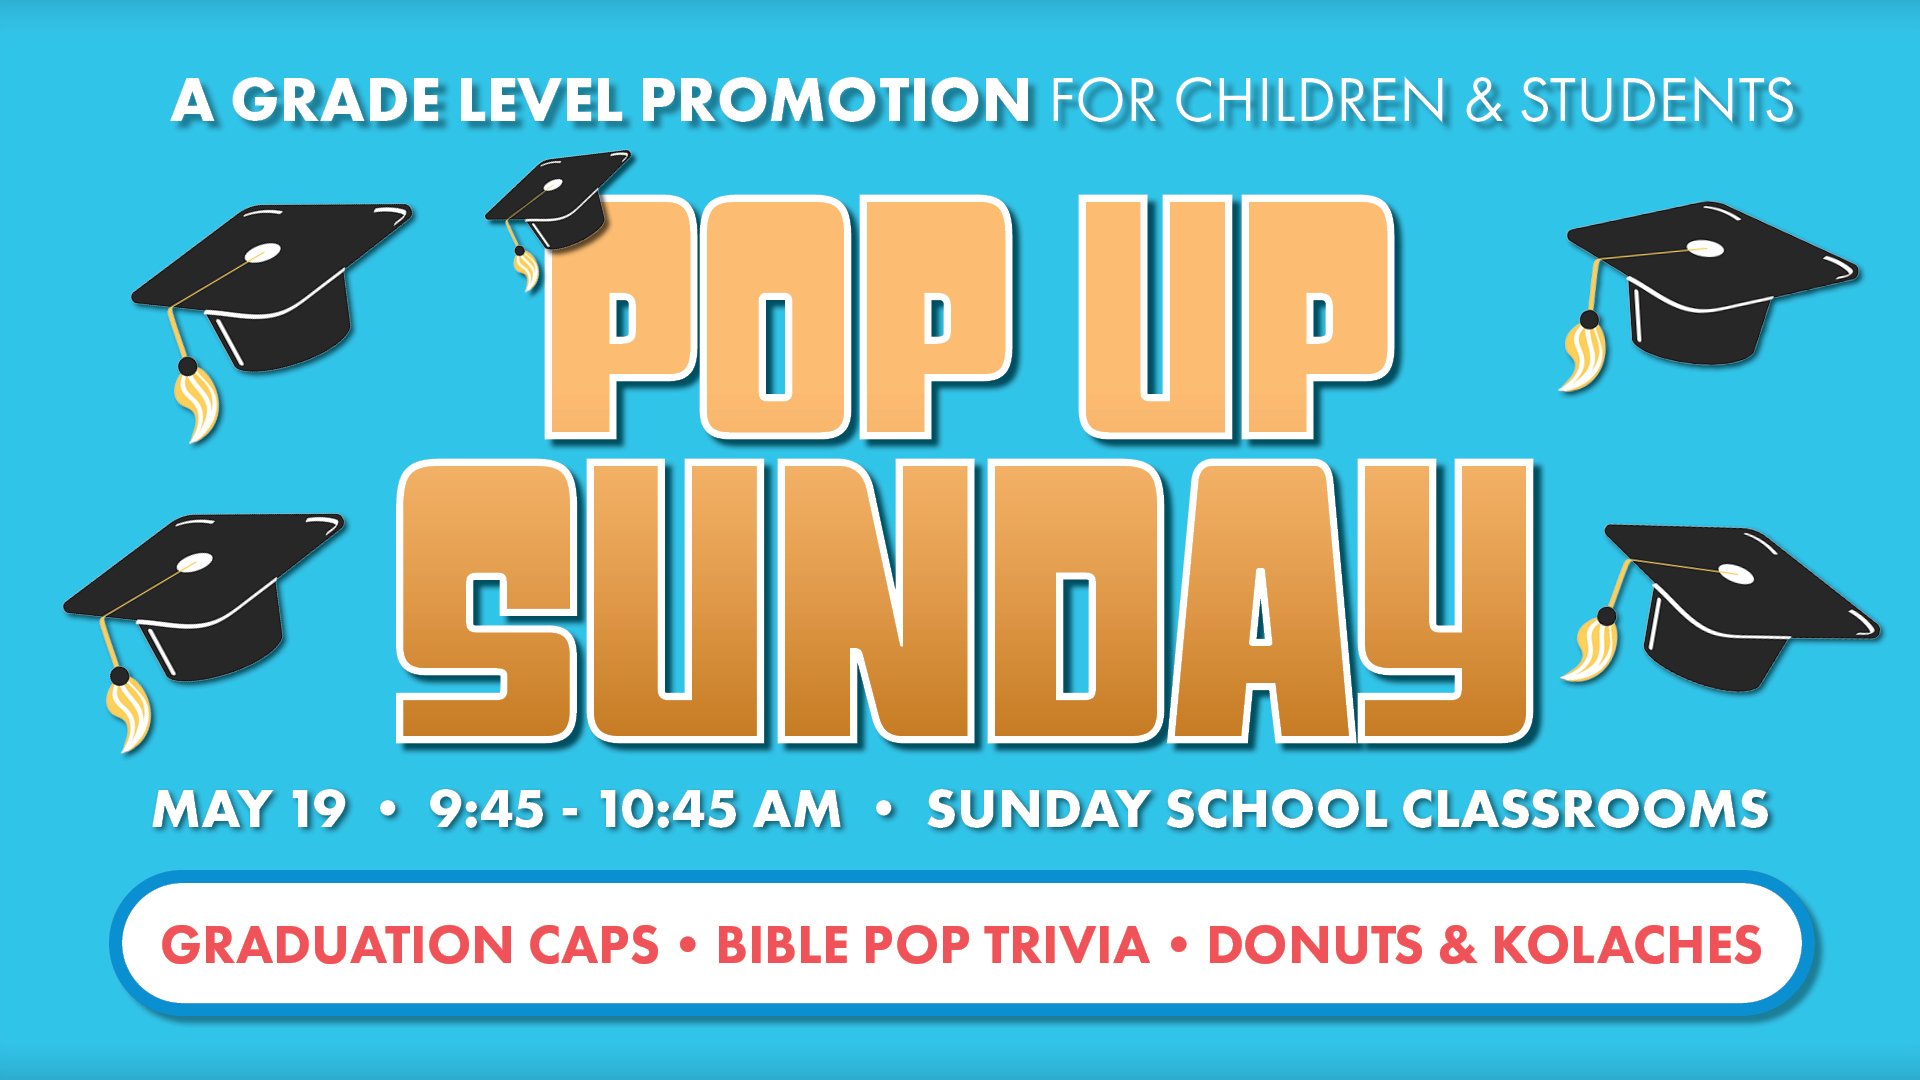 Pop Up Sunday is the day when ALL students will be promoted as they Pop Up to the next grade level. We&rsquo;ll celebrate, hand out t-shirts, and enjoy celebrating a new milestone. Children&rsquo;s Ministry will make graduation caps and student minis